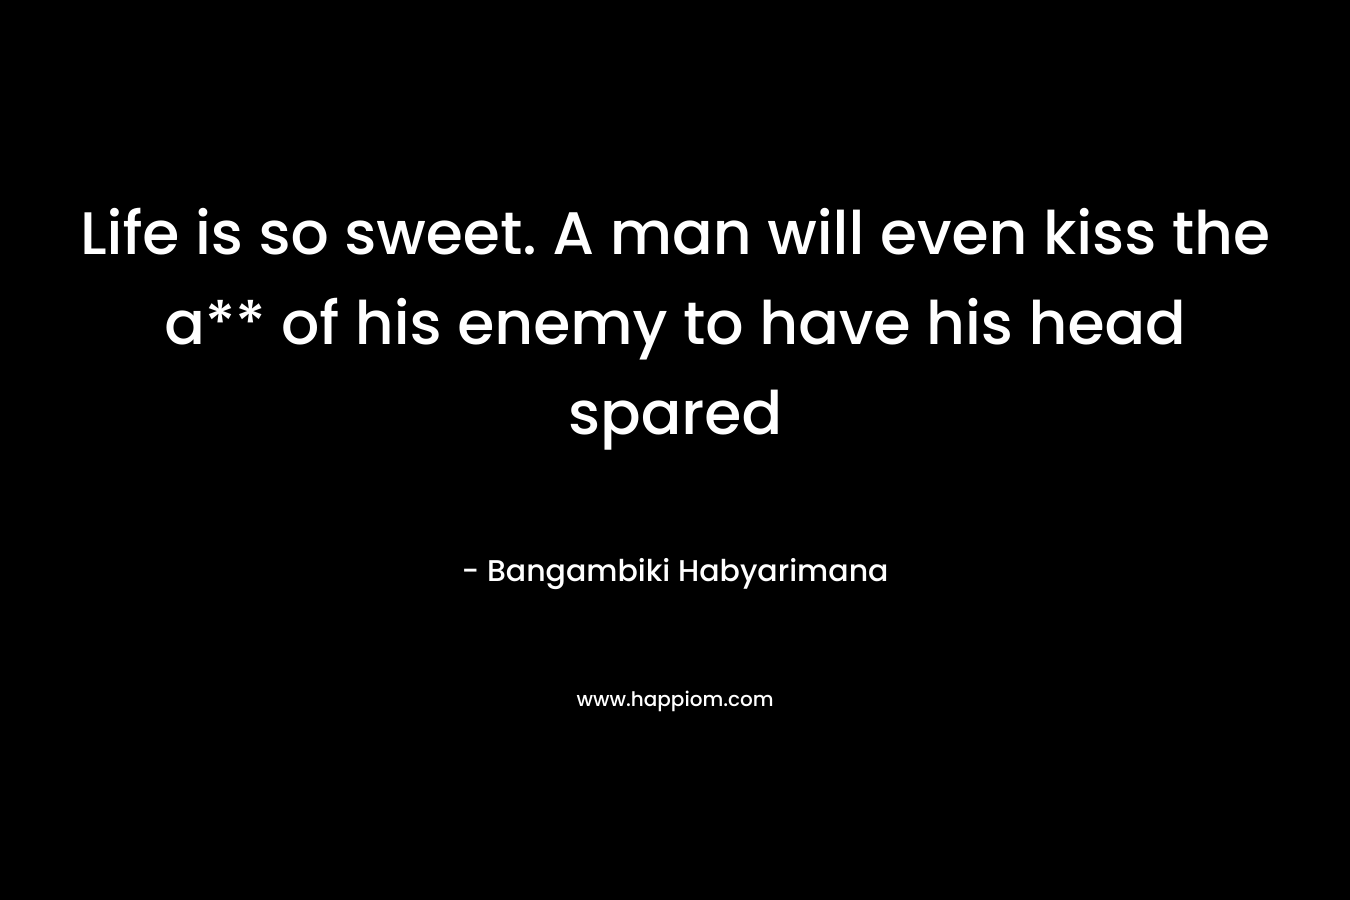 Life is so sweet. A man will even kiss the a** of his enemy to have his head spared – Bangambiki Habyarimana